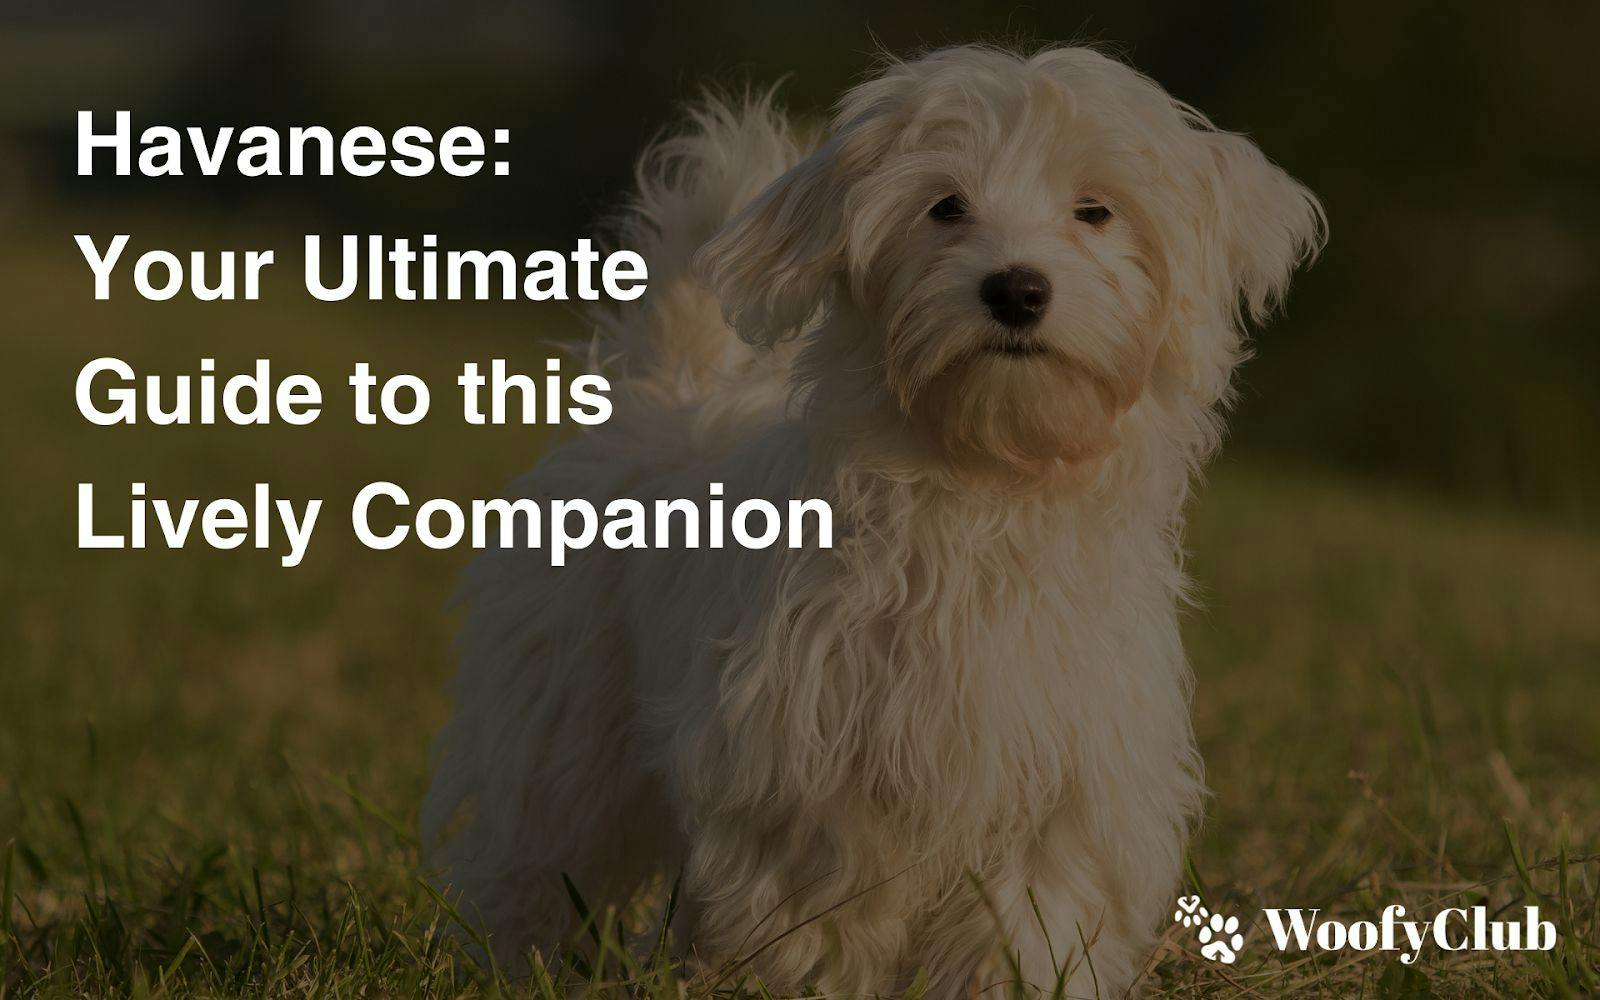 Havanese: Your Ultimate Guide To This Lively Companion